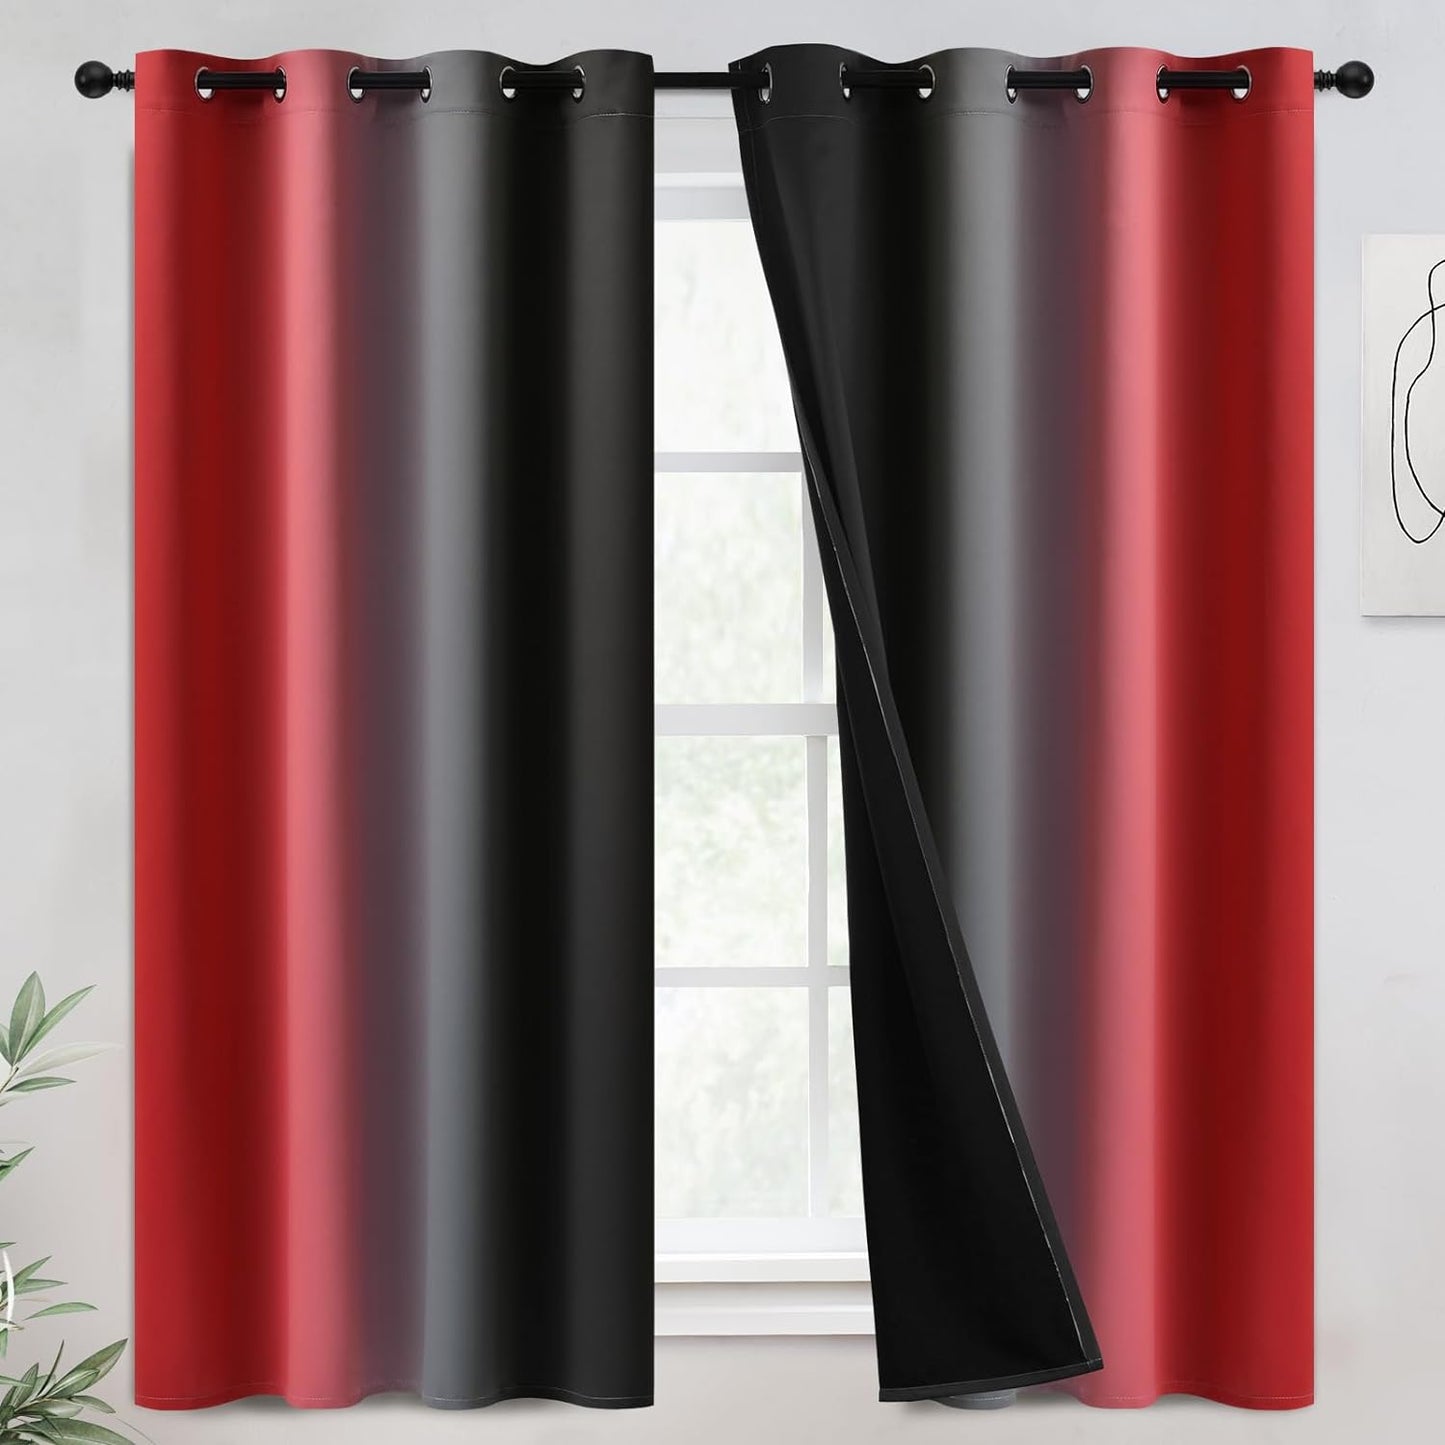 COSVIYA 100% Blackout Curtains & Drapes Ombre Purple Curtains 63 Inch Length 2 Panels,Full Room Darkening Grommet Gradient Insulated Thermal Window Curtains for Bedroom/Living Room,52X63 Inches  COSVIYA Blackout Red And Black 52W X 63L 